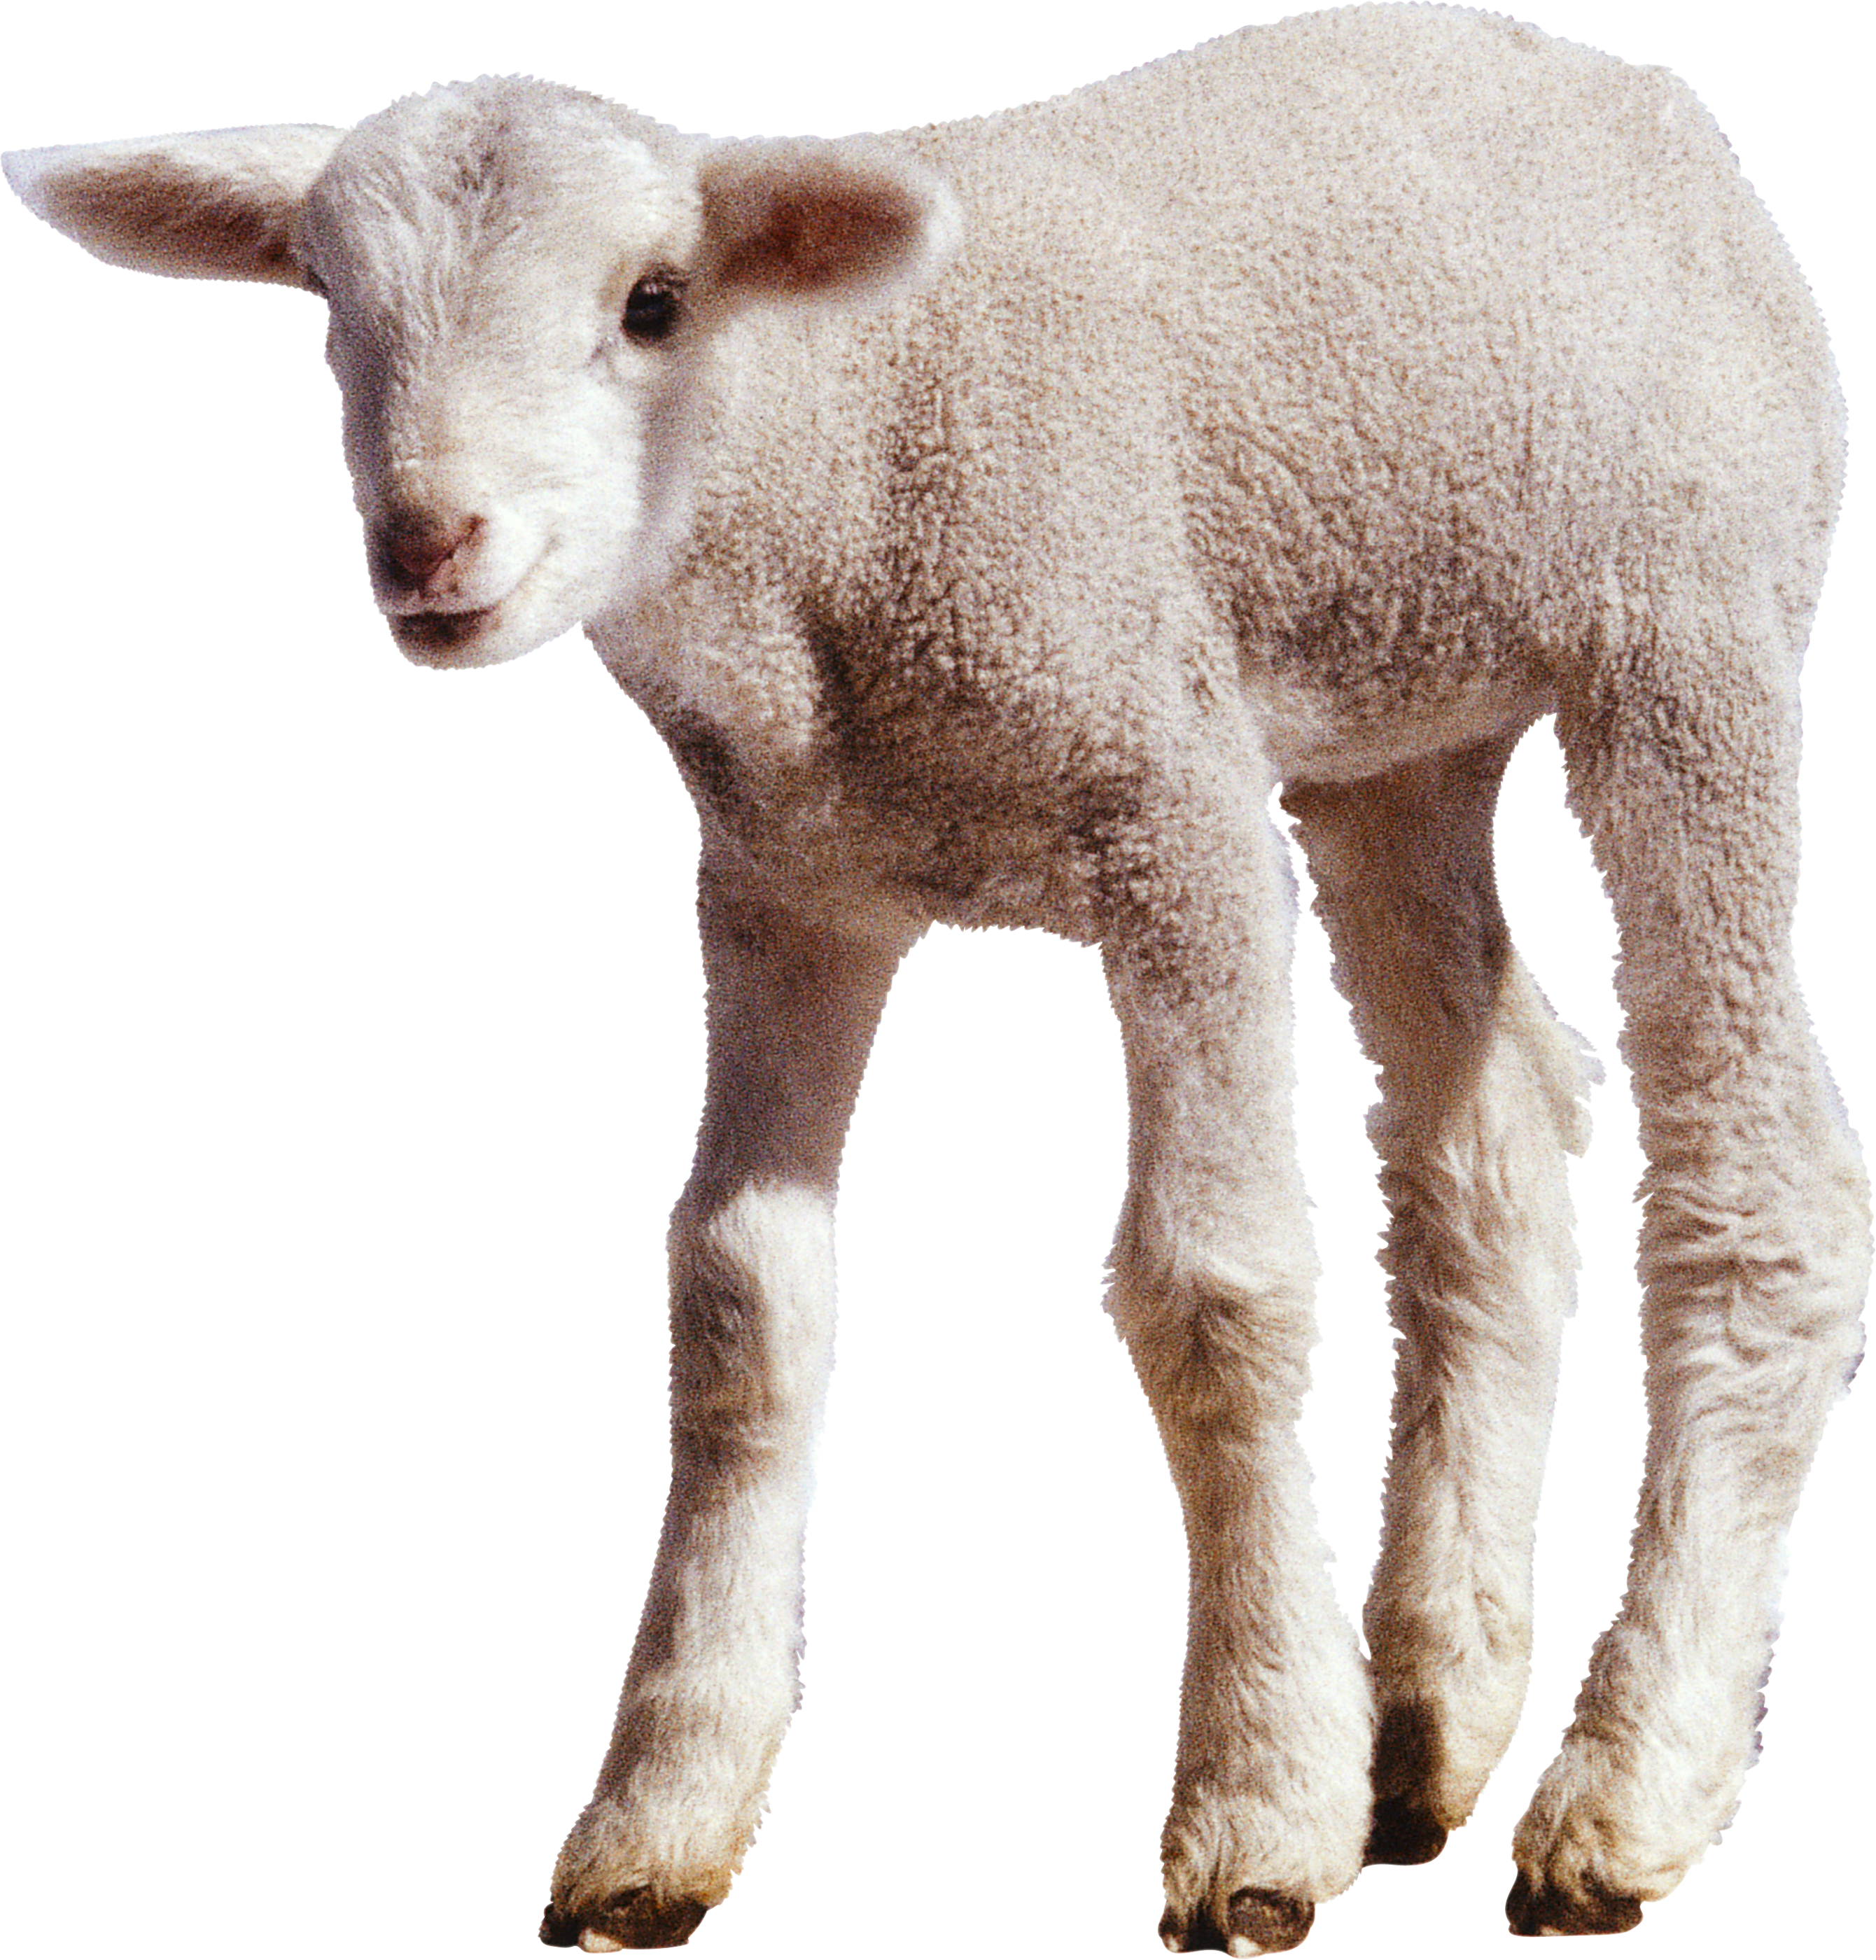 Sheep PNG images Download